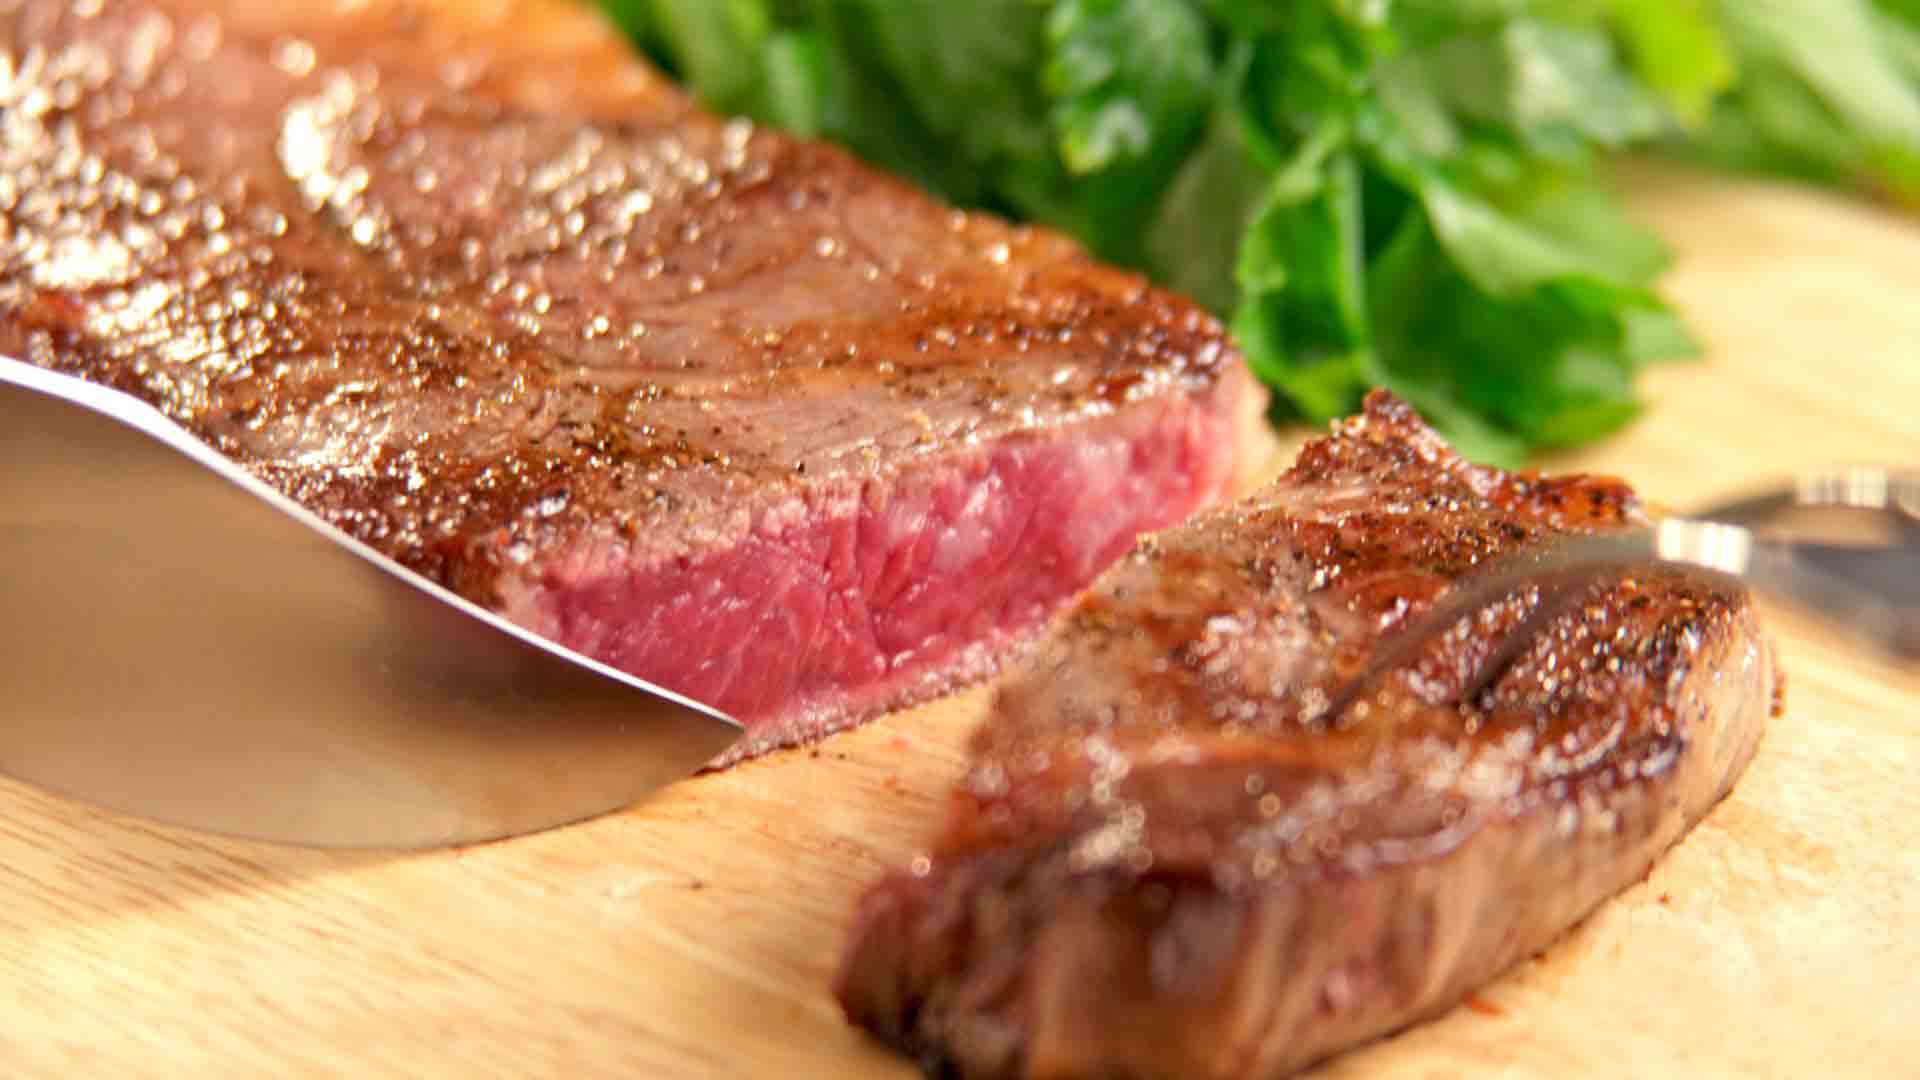 Cuts Of Steak Ranked From Worst To Best - YouTube